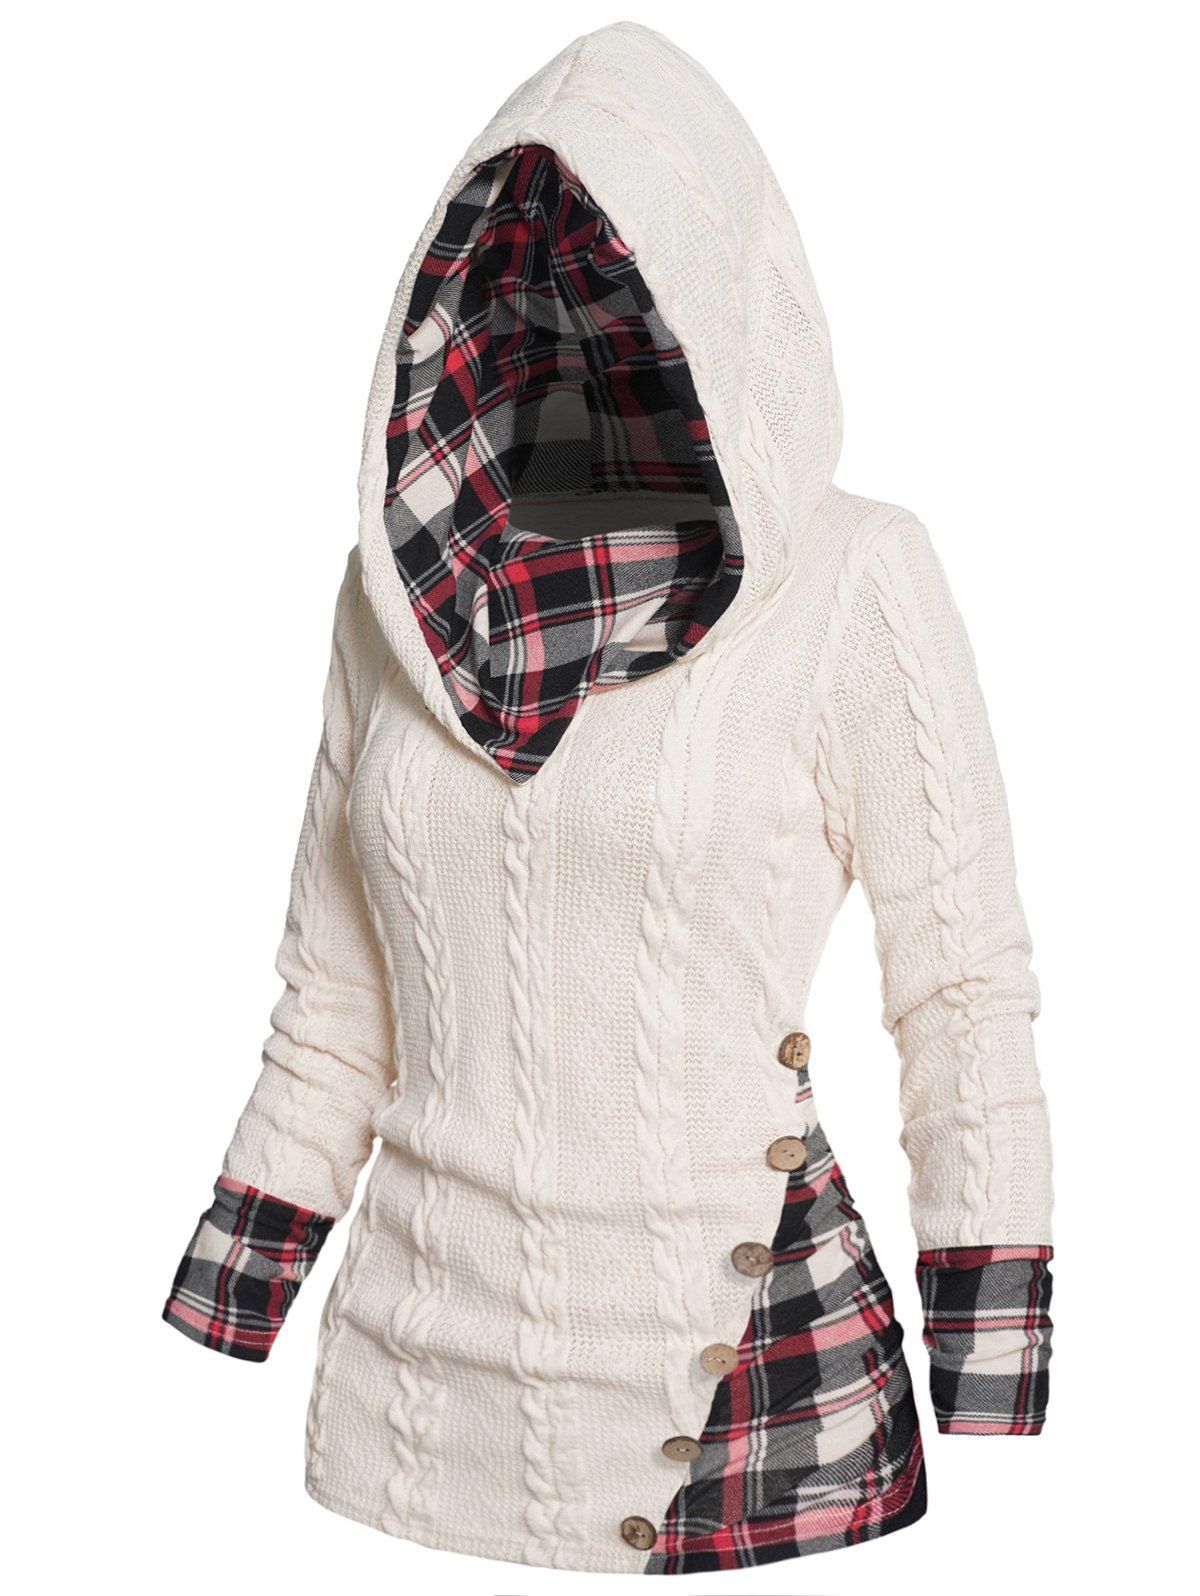 Plus Size Hooded Sweater Plaid Print Panel Twisted Knit Mock Button Sweater With Hood - LIGHT COFFEE 3X